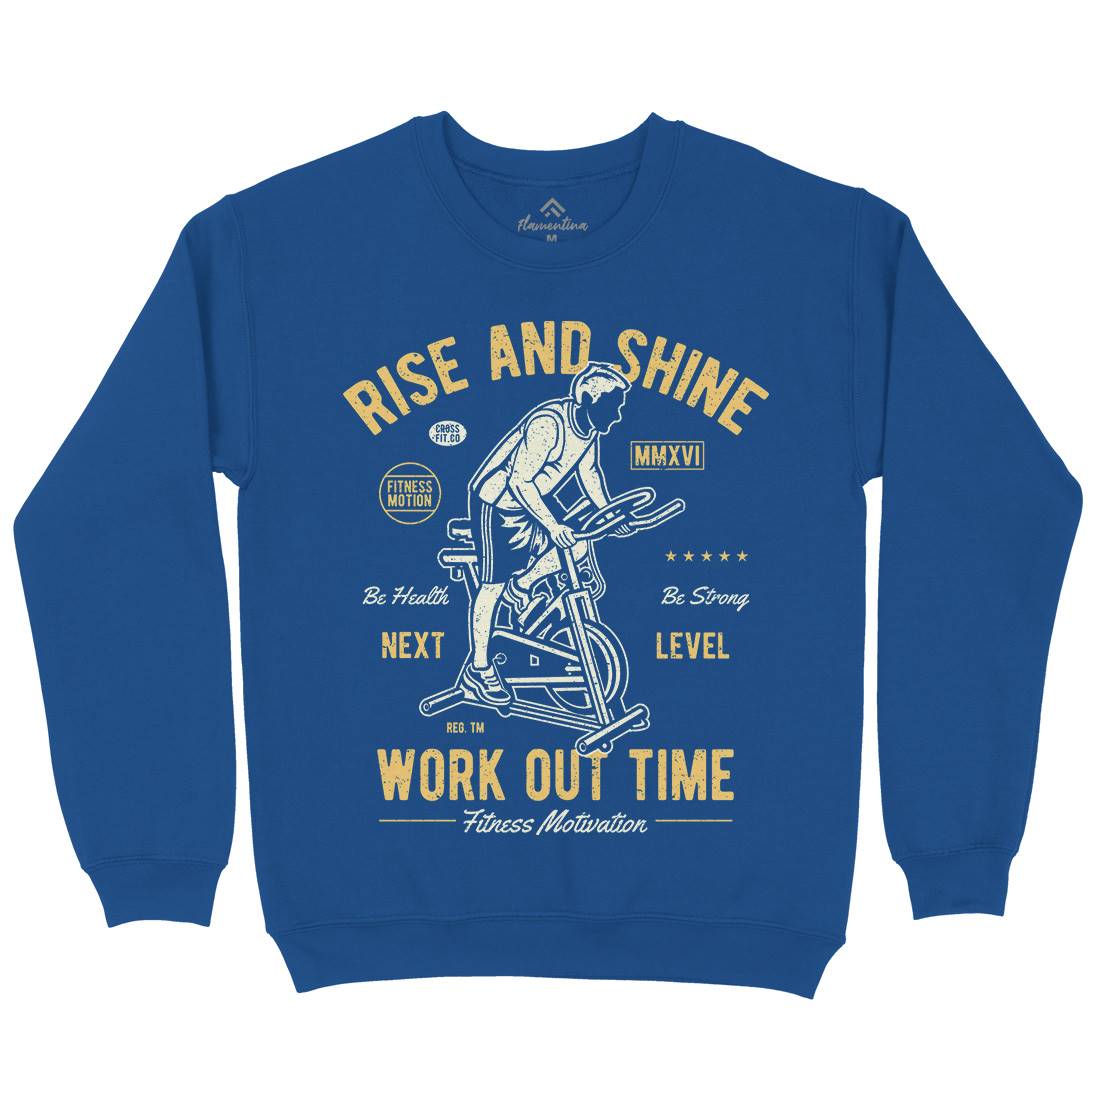 Work Out Time Mens Crew Neck Sweatshirt Gym A199